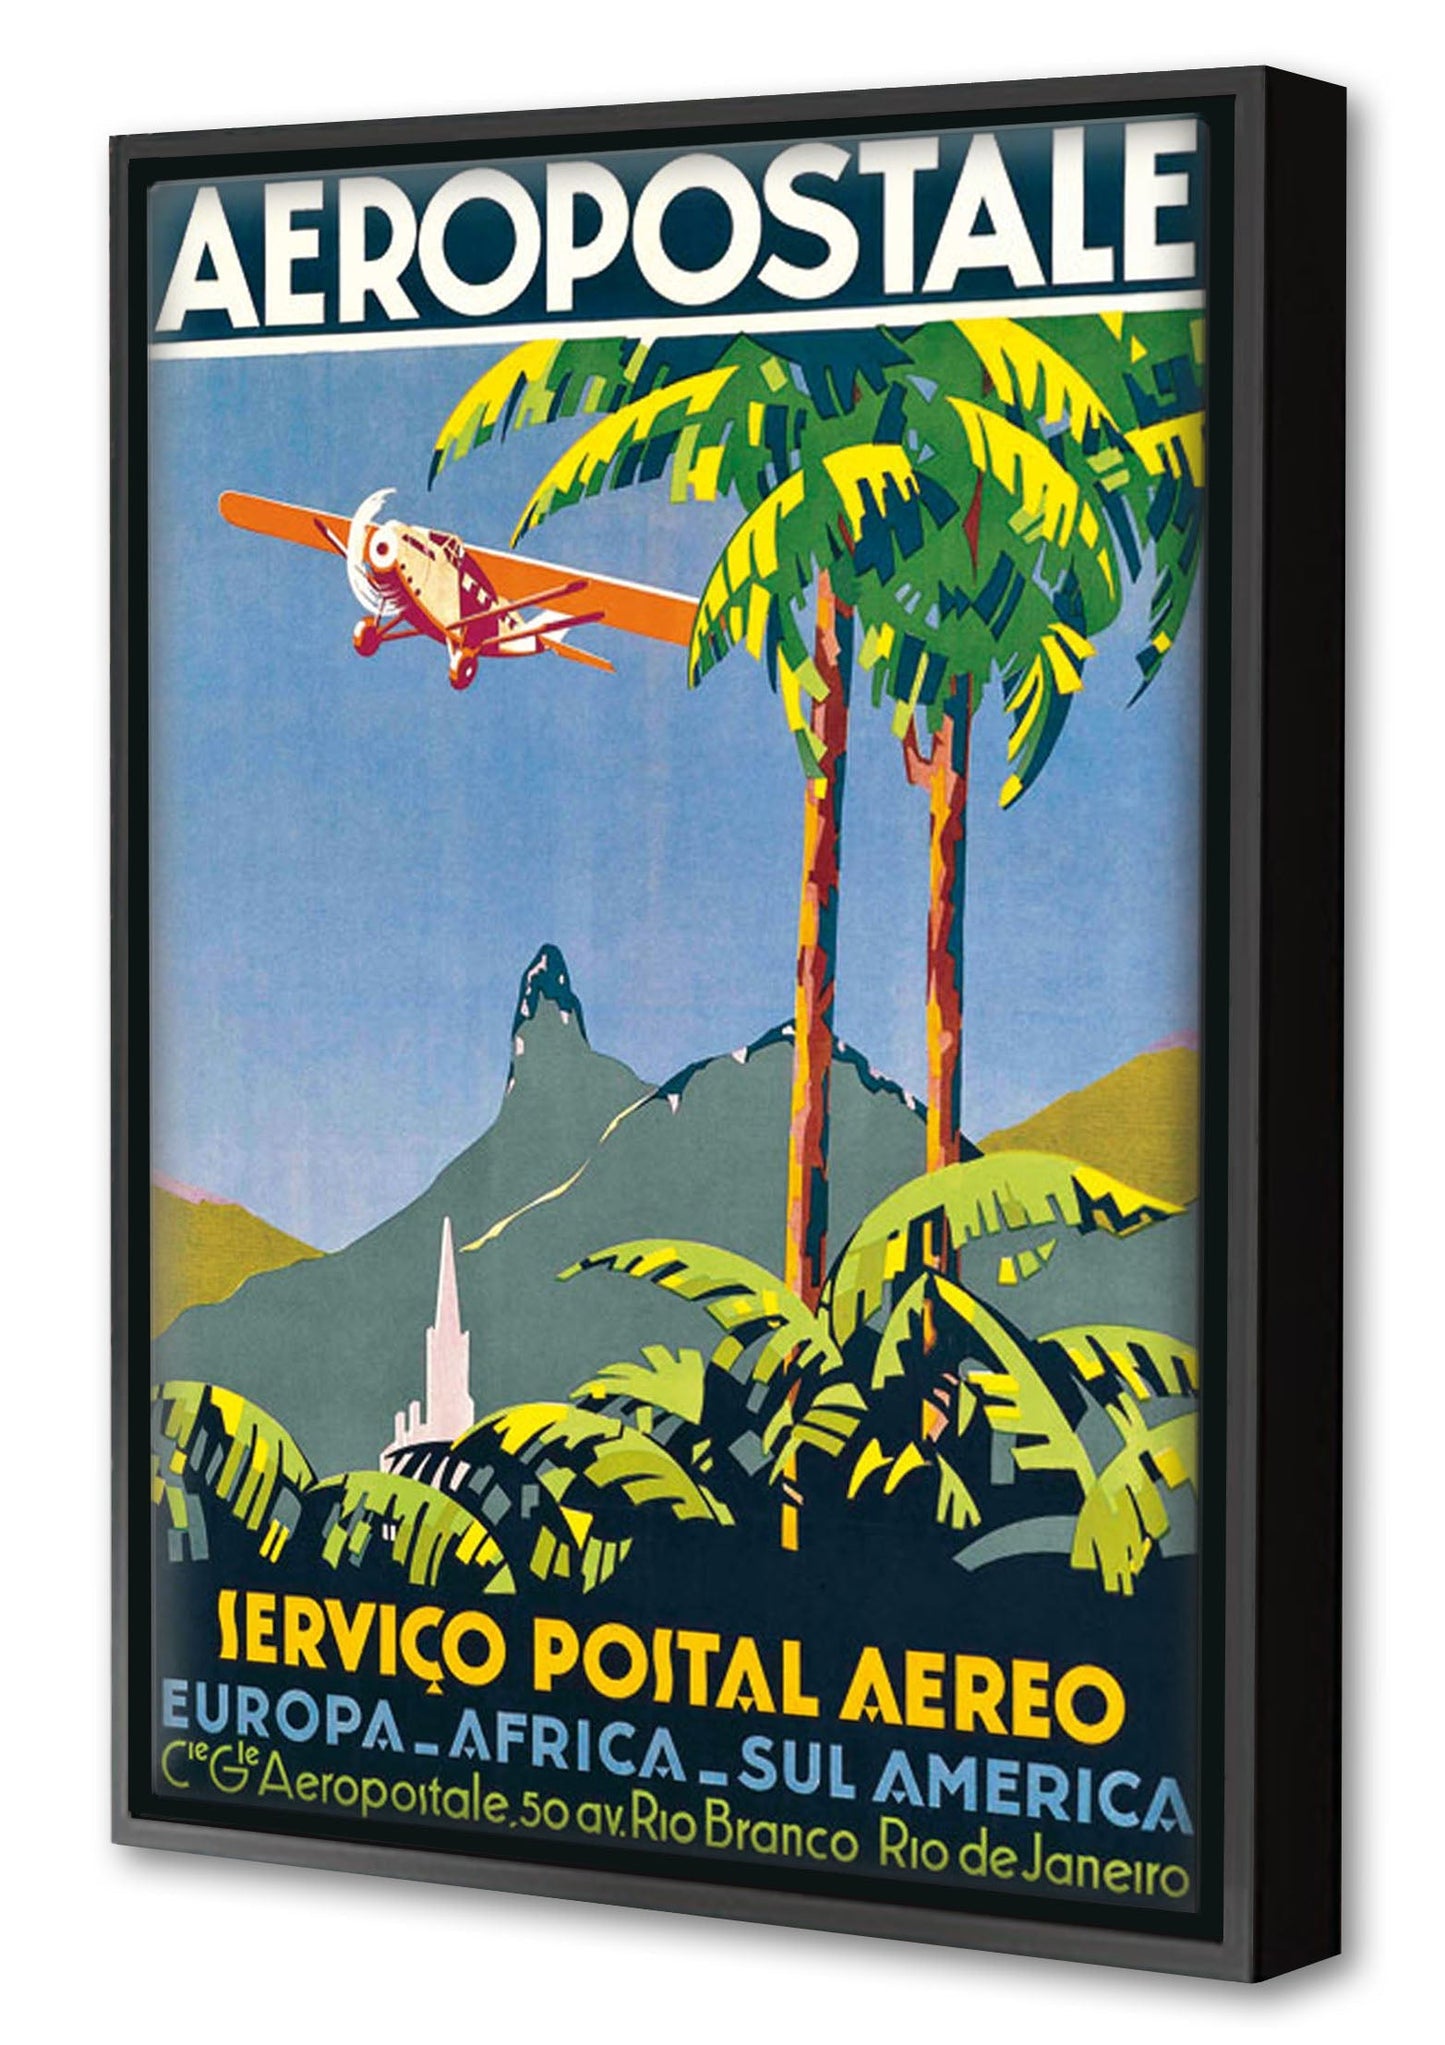 Aeropostale-airlines, print-Canvas Print with Box Frame-40 x 60 cm-BLUE SHAKER